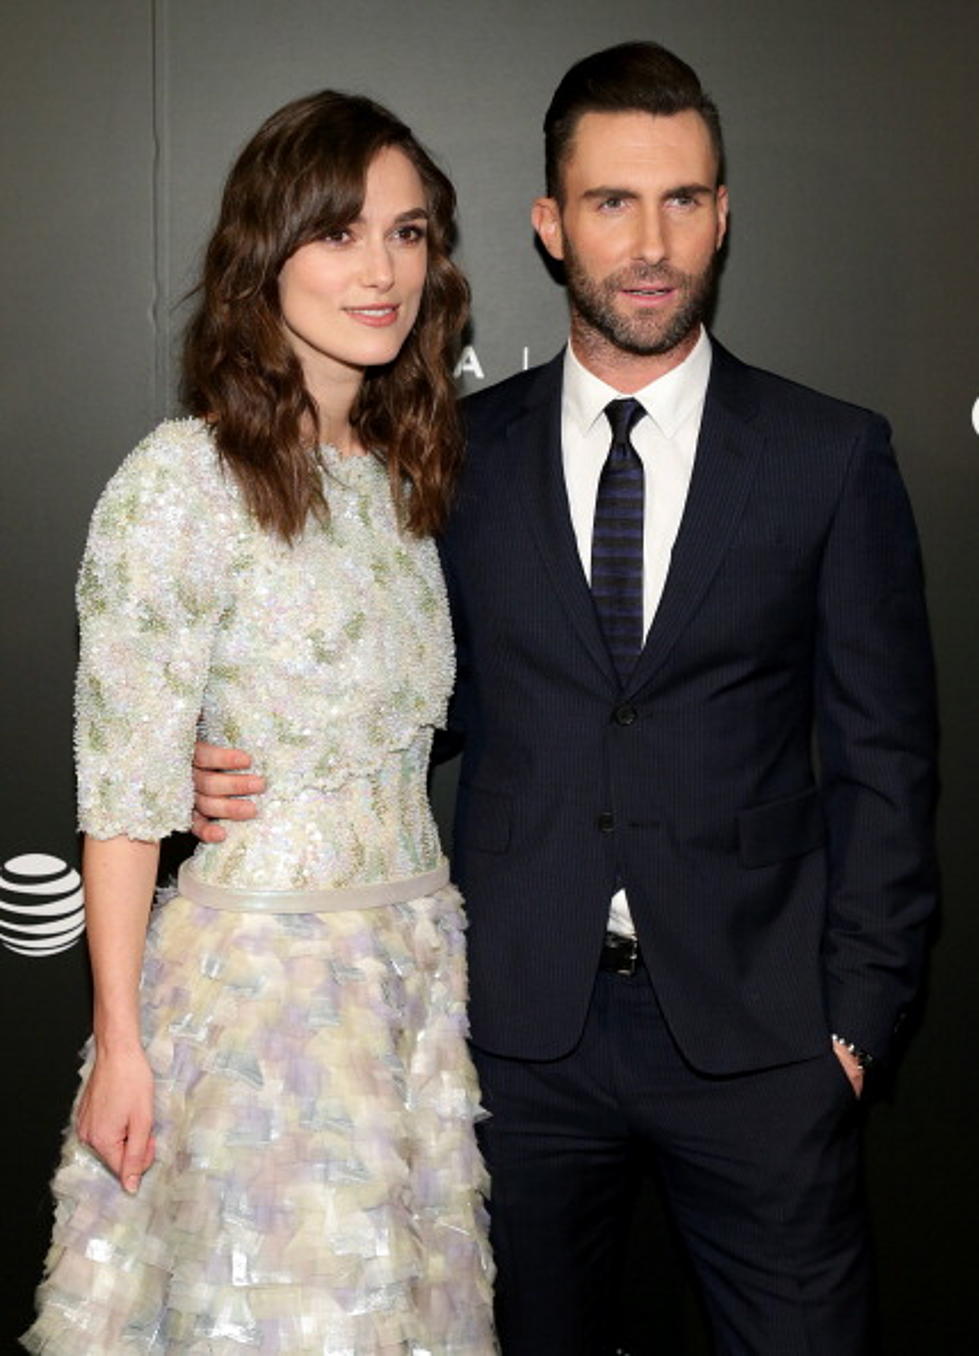 Keira Knightly On Adam Levine, &#8216;He Plays A D&#8211;khead Well&#8217; [VIDEO]